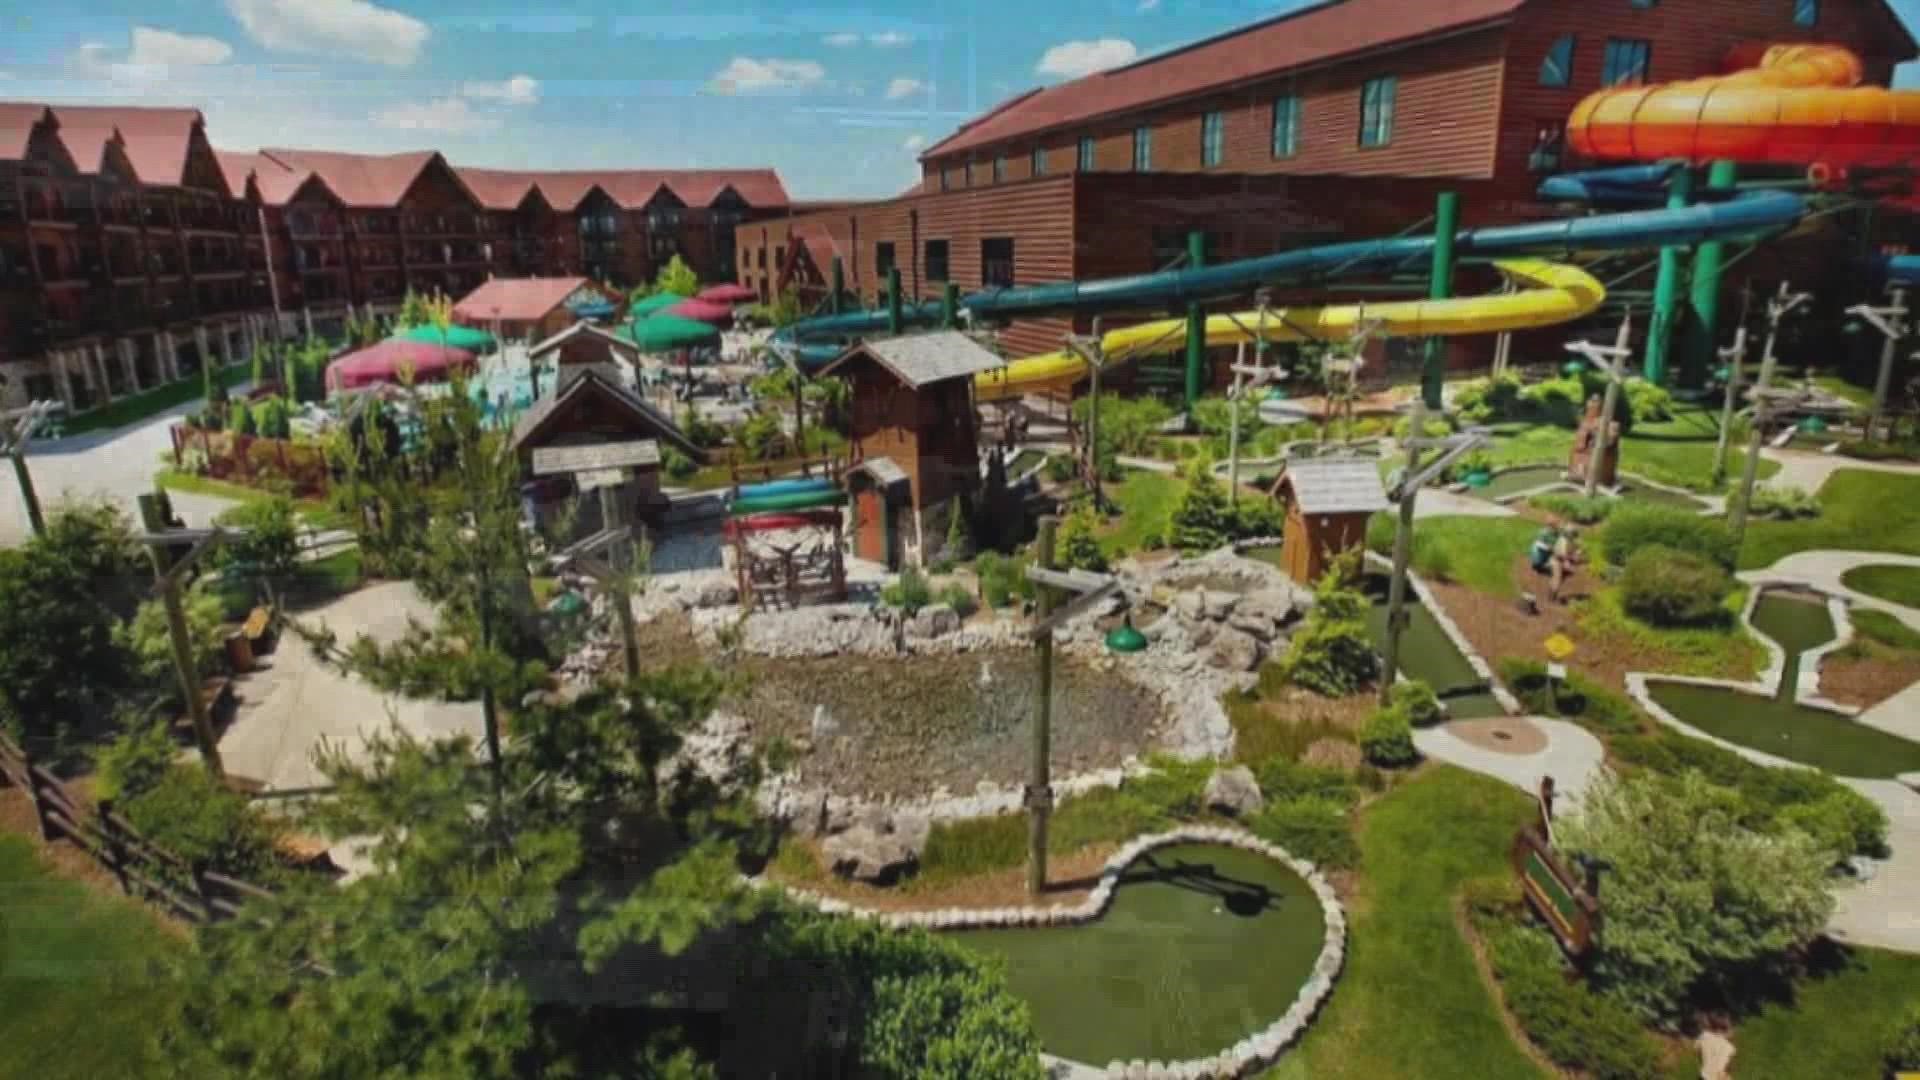 The former Six Flags location has been approved to be redeveloped and revamped.